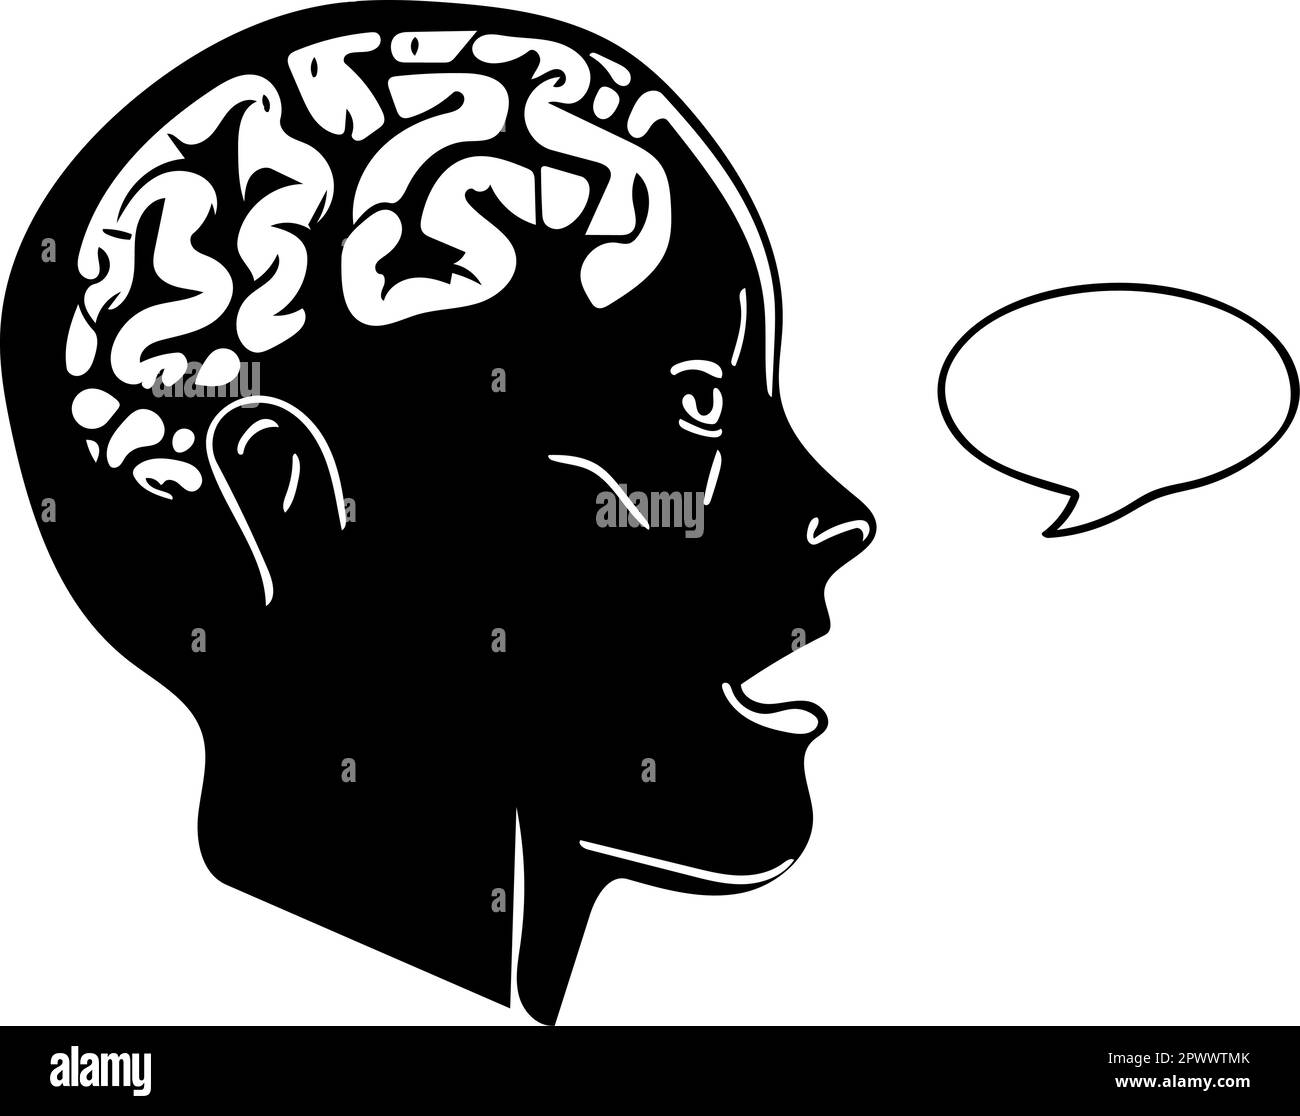 Human women head sideways in portrait. Speech bubble symbolizes that she is speaking. The brain is visible. Vector against transparent background. Stock Vector